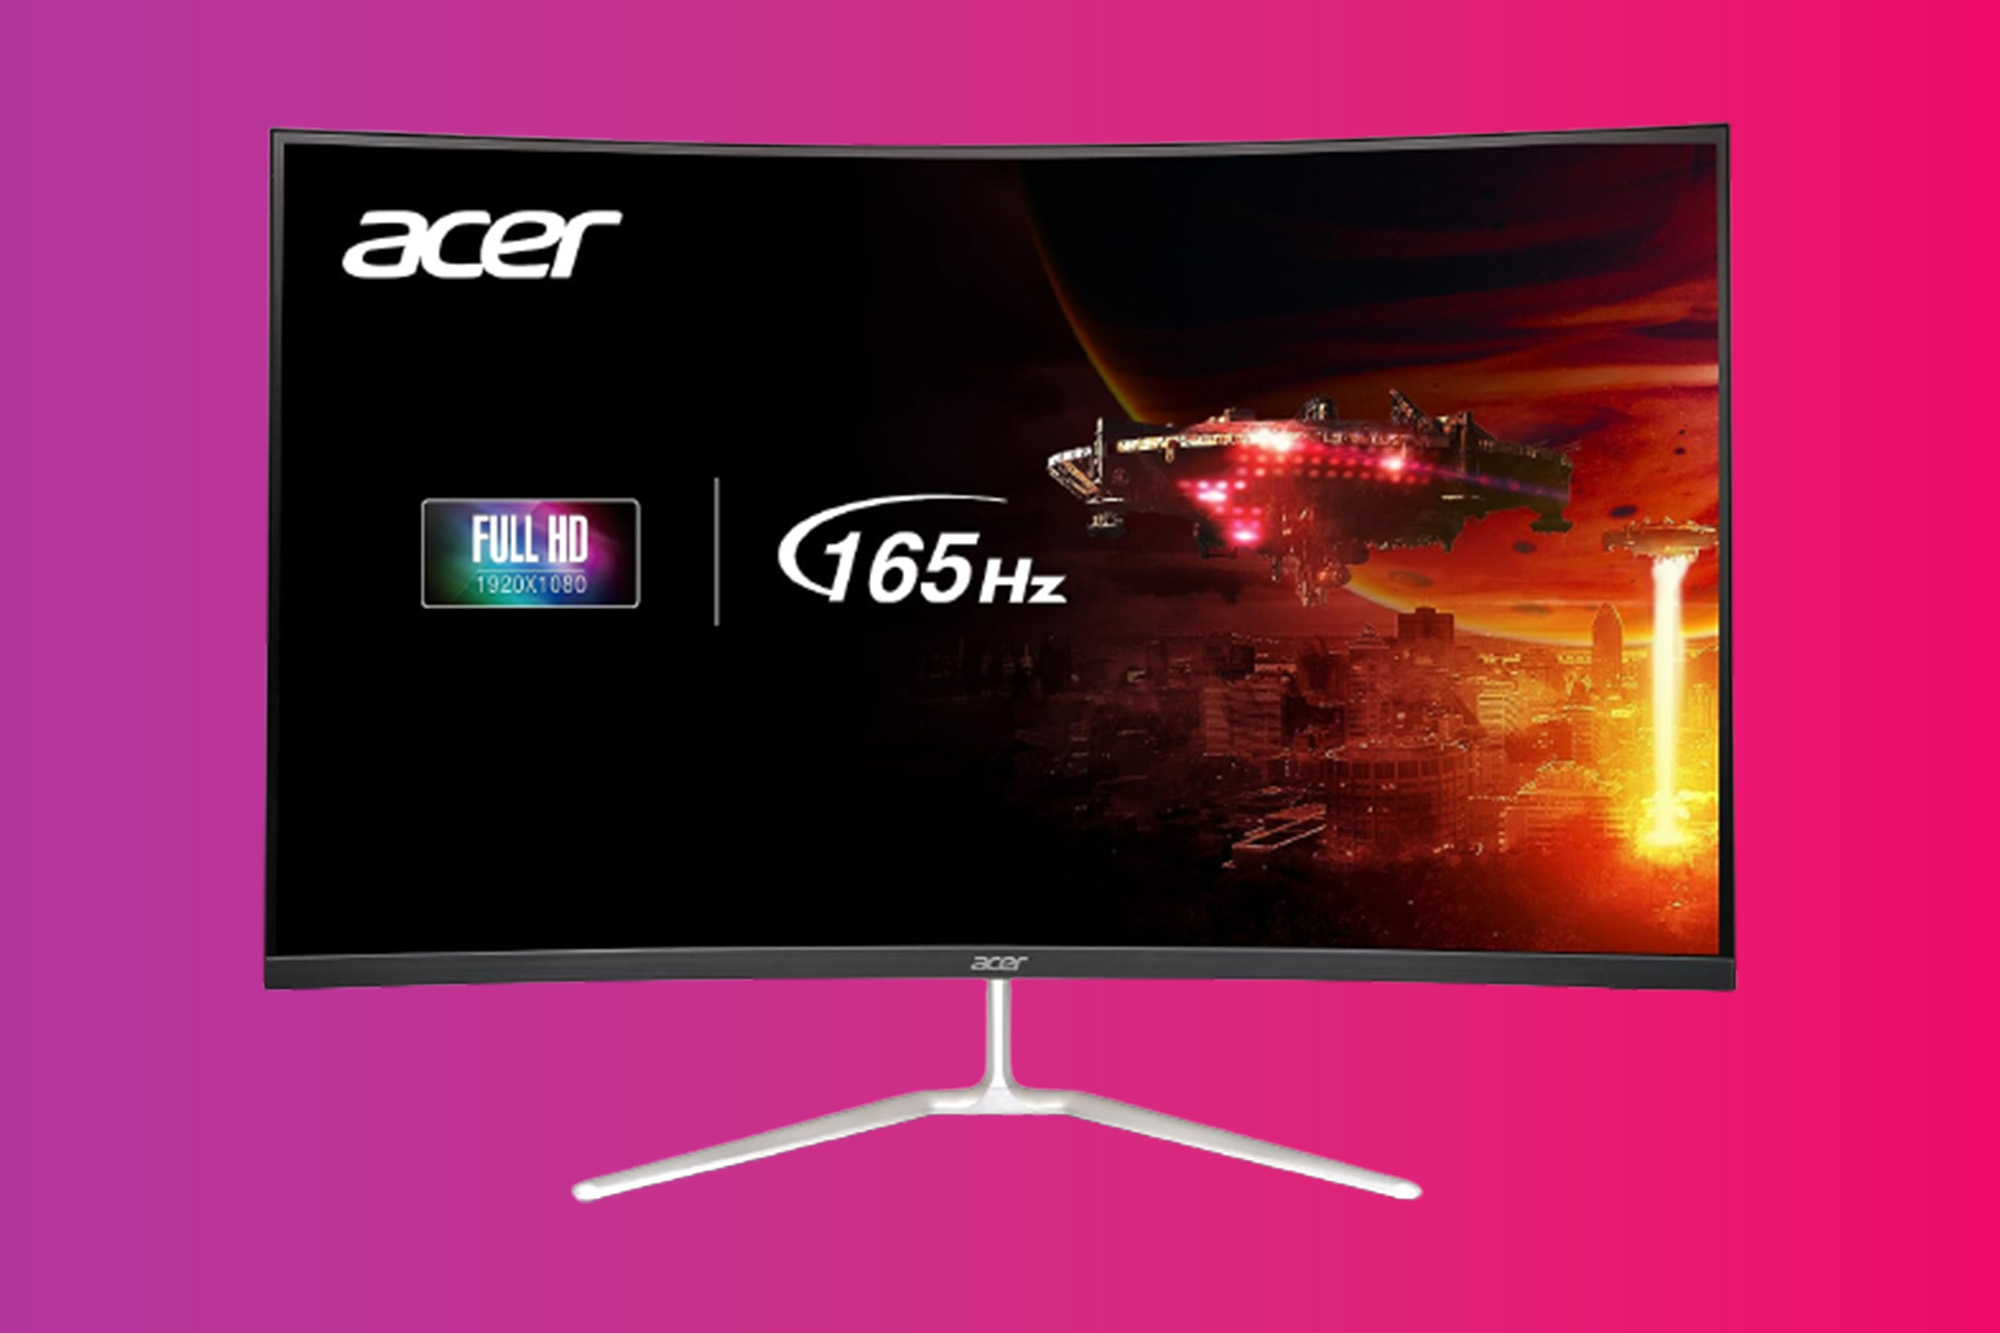 Save up to 25% on gaming monitors from Samsung, Acer, and more at Amazon